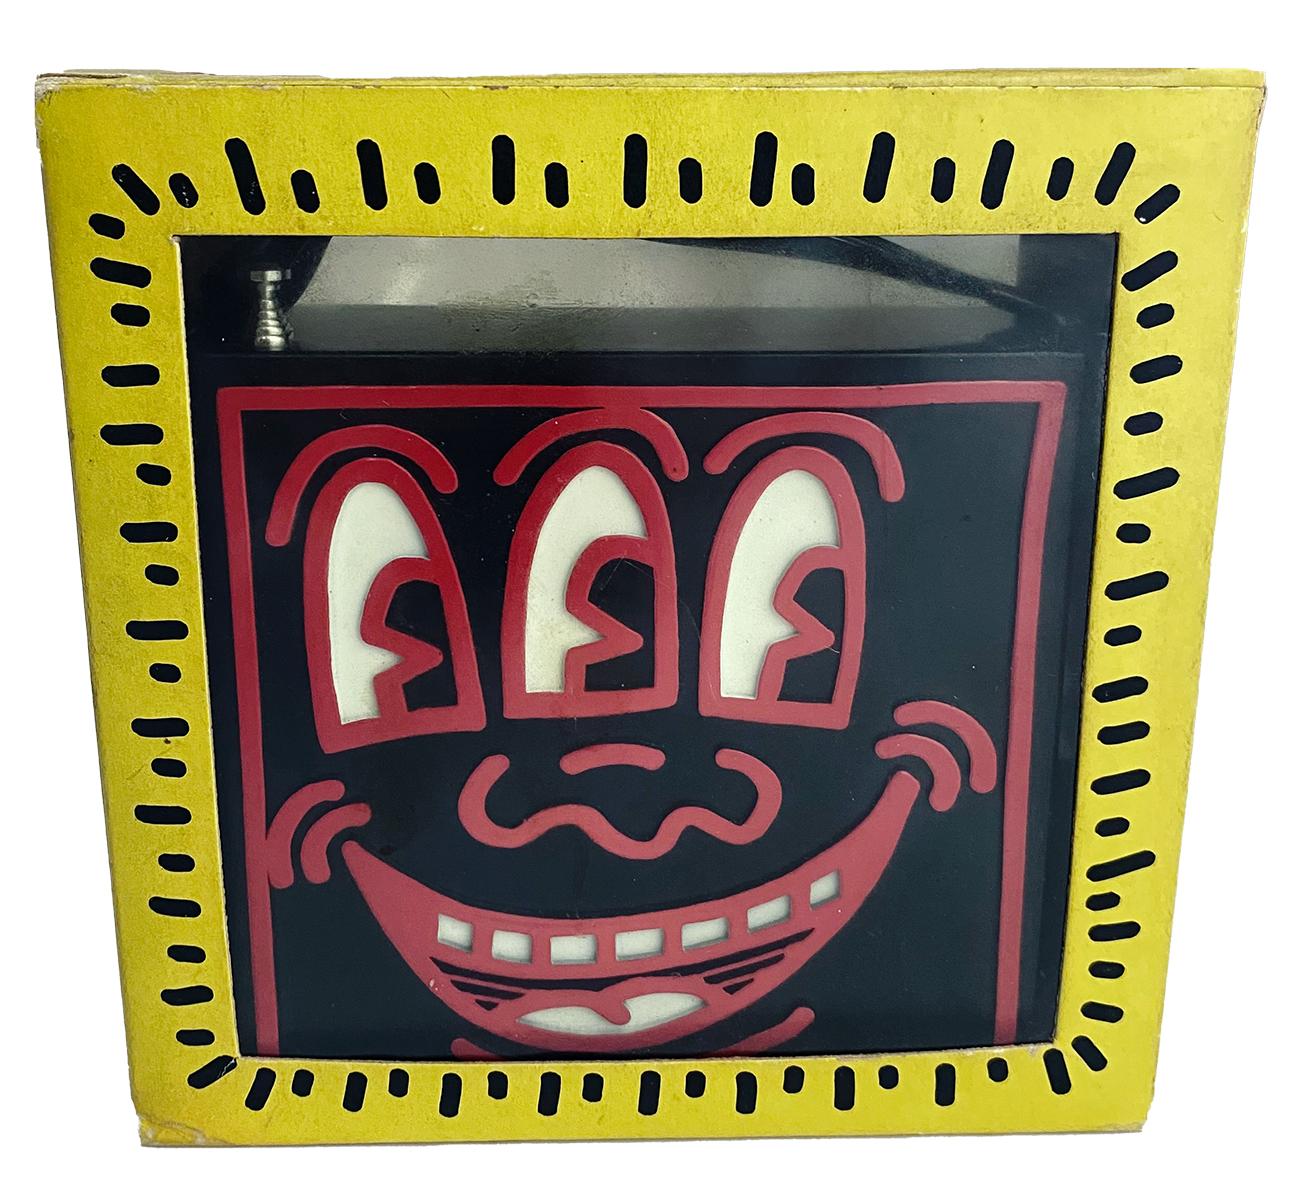 Keith Haring Pop Shop 1986:
A very well preserved Keith Haring Pop Shop radio accompanied by its original packaging. Sold at the Pop Shop in New York c. 1985. Features a bold Keith Haring printed signature on box and a molded signature on radio.